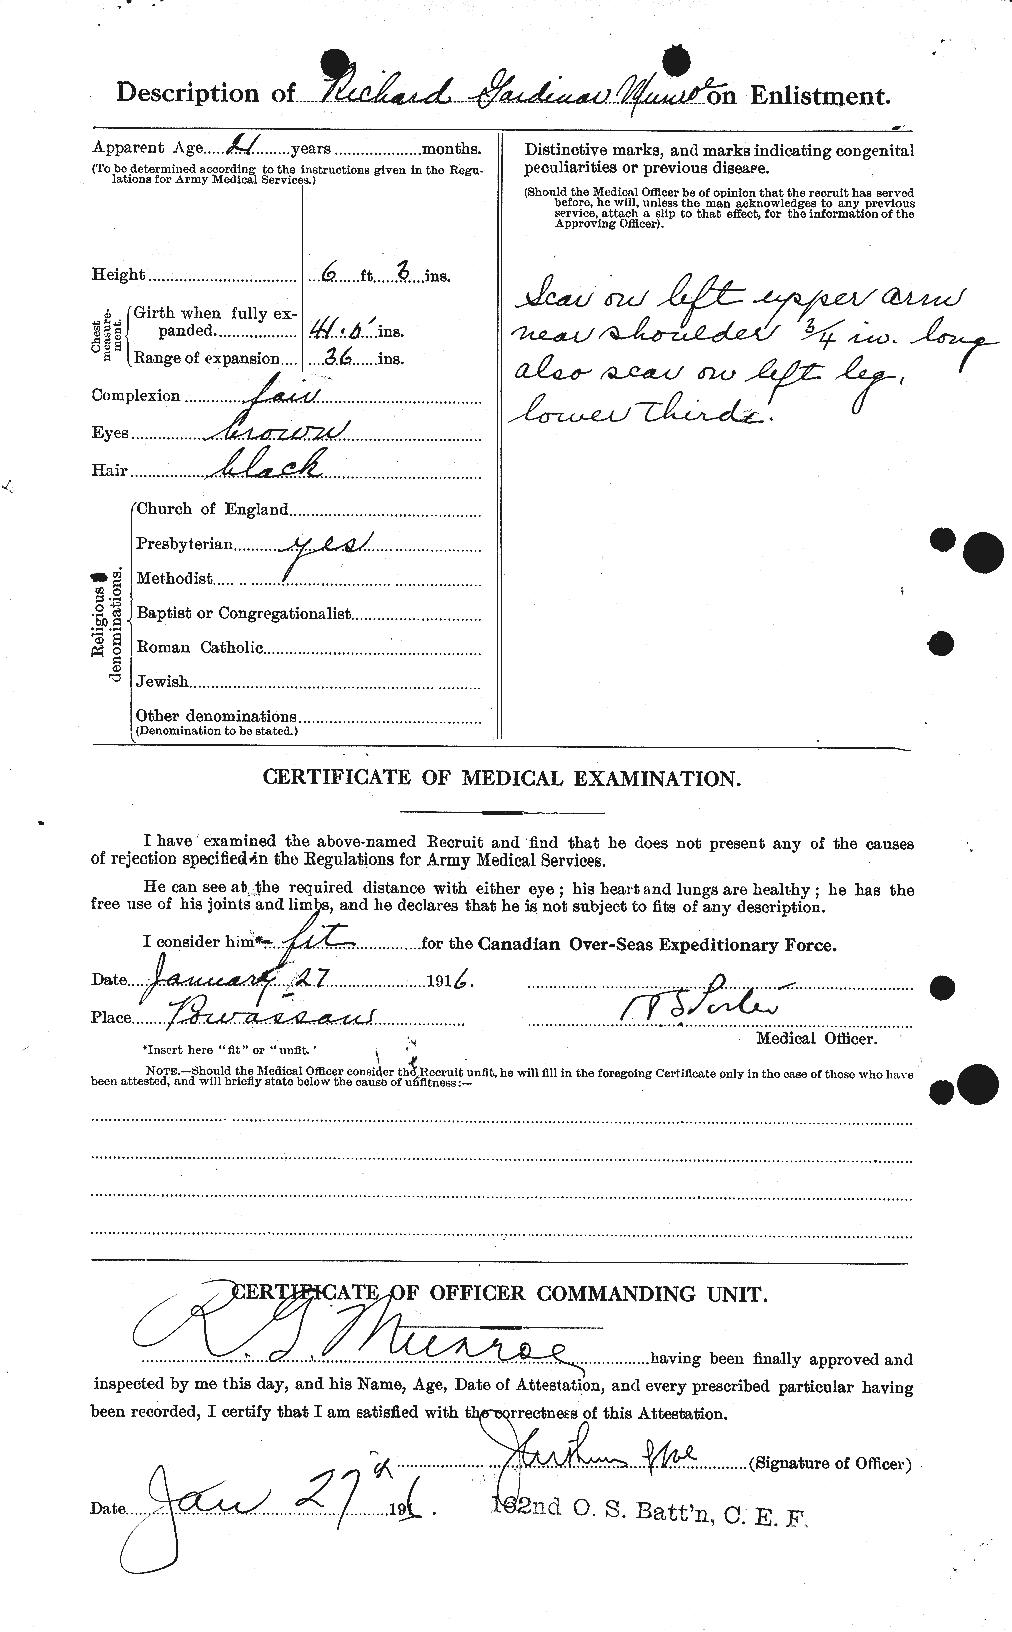 Personnel Records of the First World War - CEF 515574b